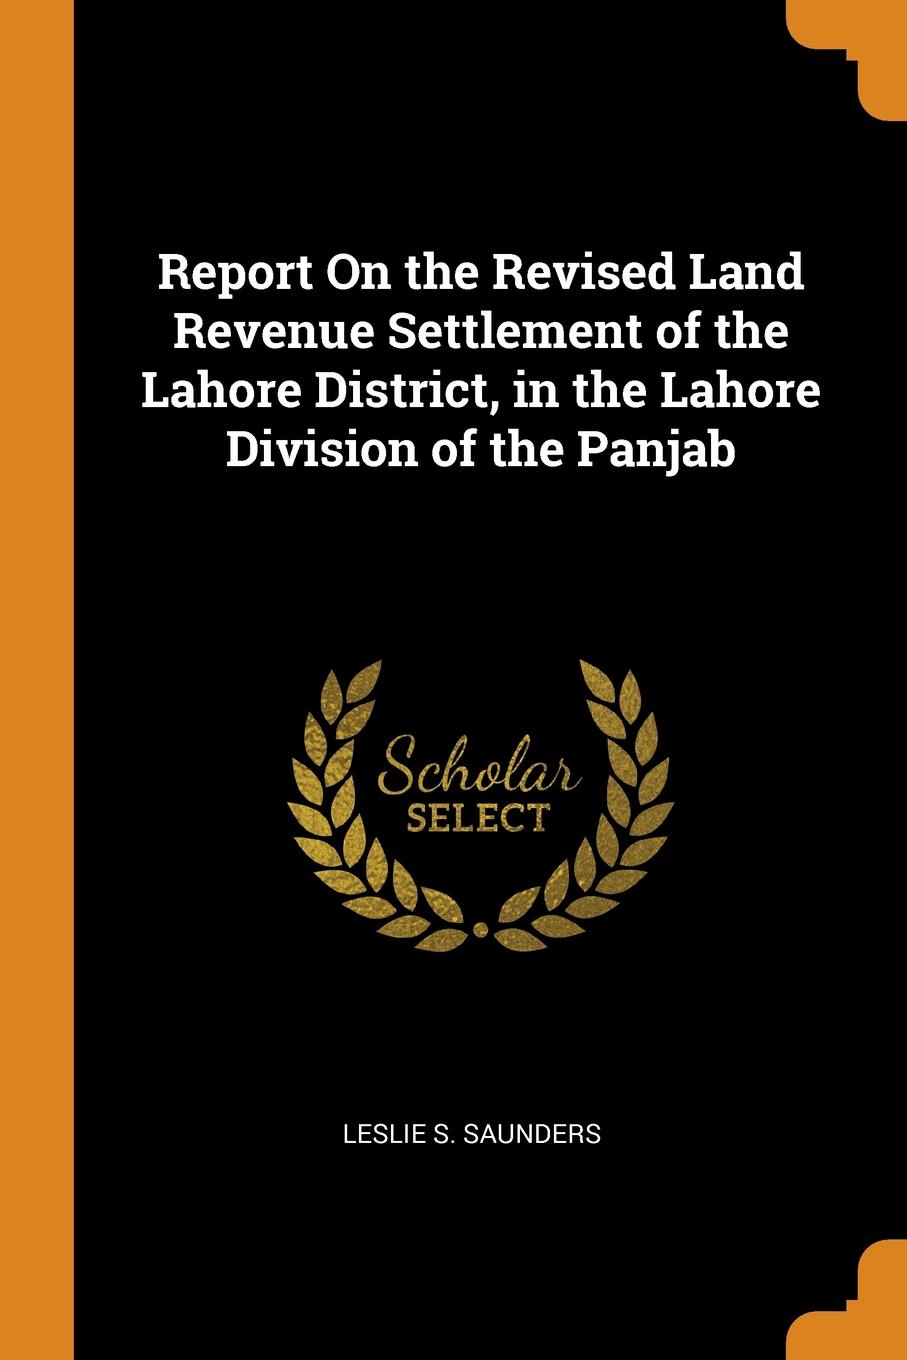 фото Report On the Revised Land Revenue Settlement of the Lahore District, in the Lahore Division of the Panjab